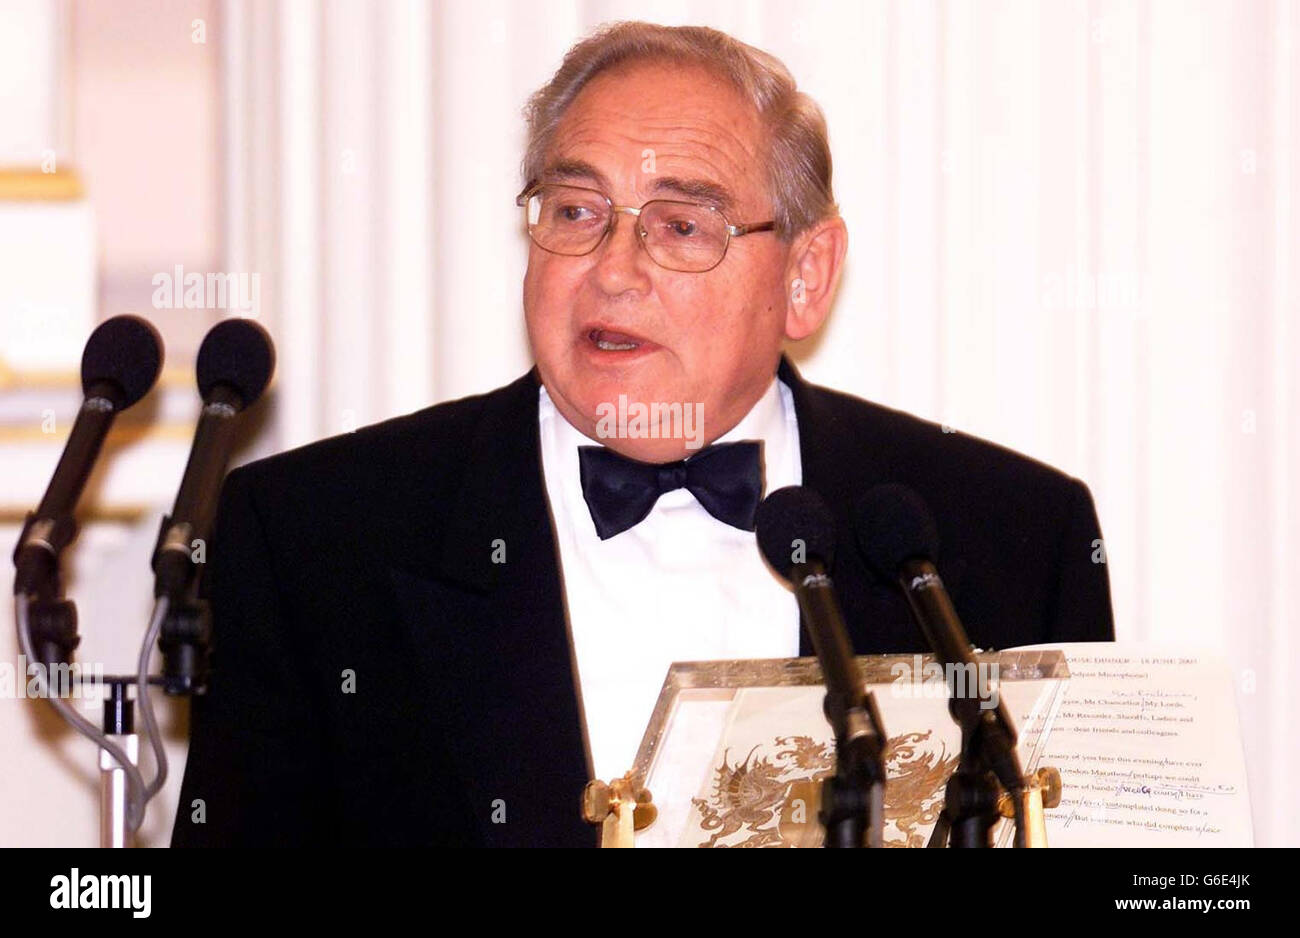 Sir Edward George, Governor of the Bank of England addresses the Lord Mayor's Dinner. He was speaking to an audience of merchant bankers at Mansion House, in the City of London. Stock Photo